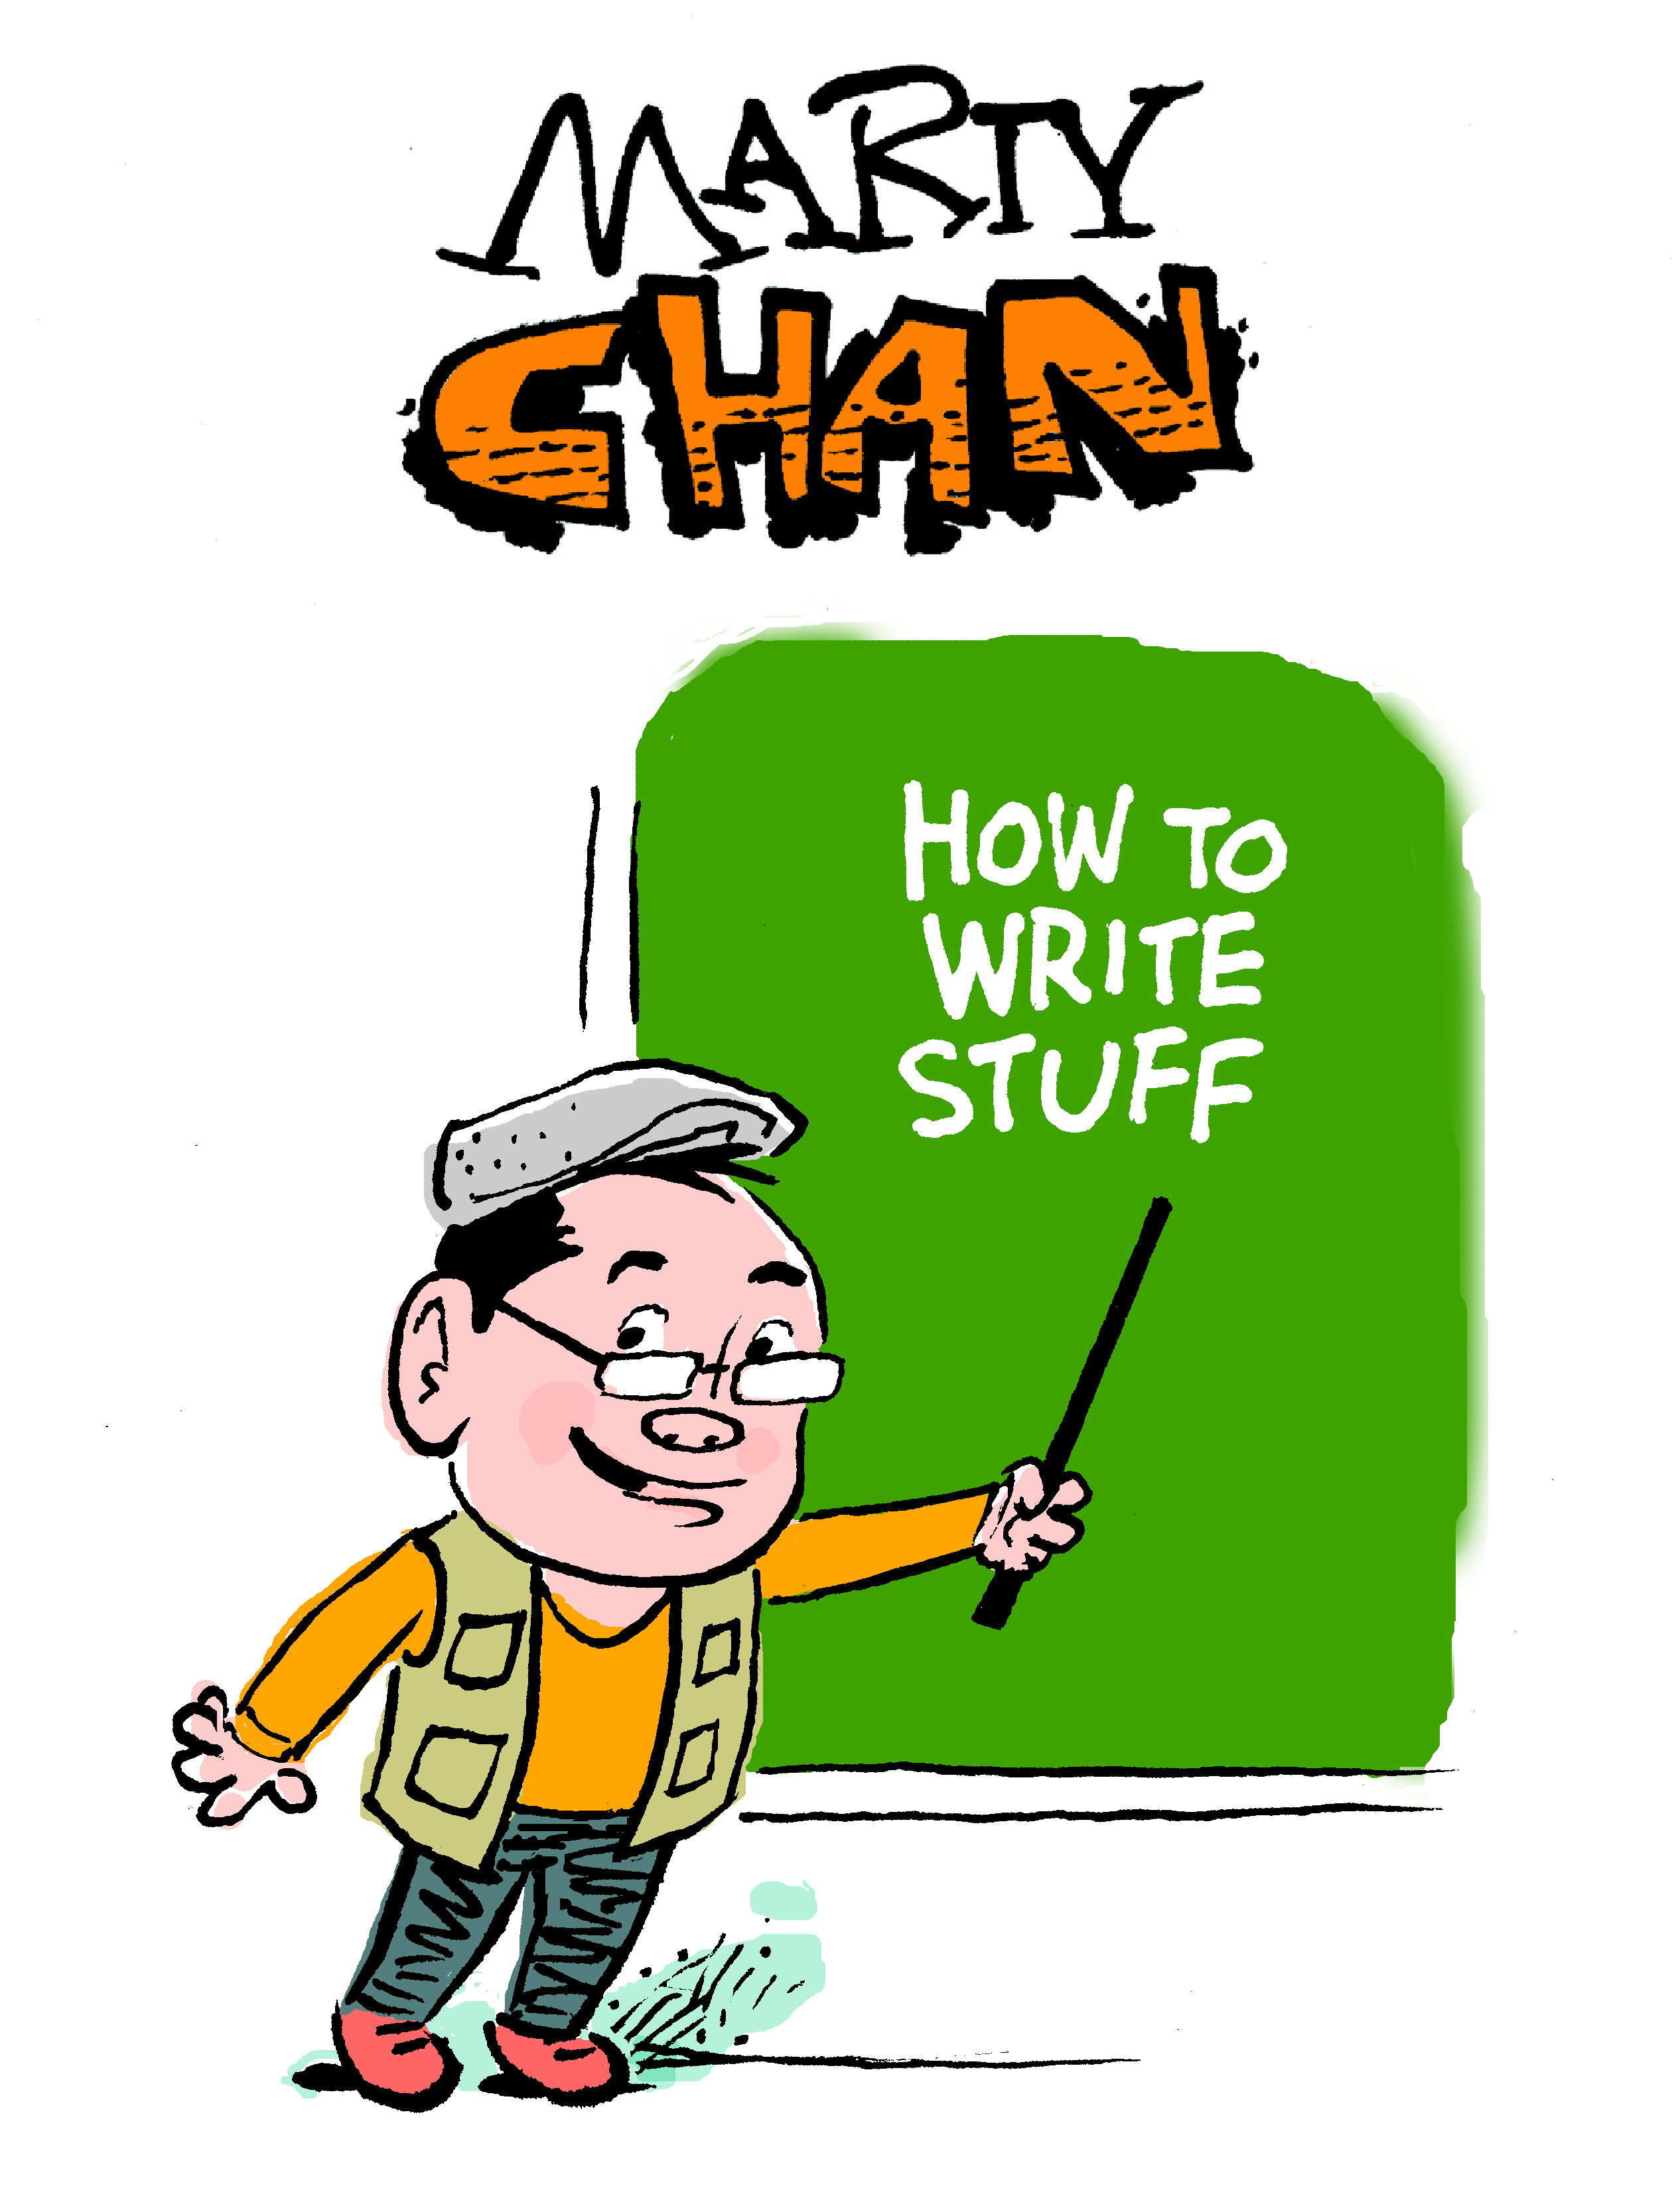 Author Marty Chan logo